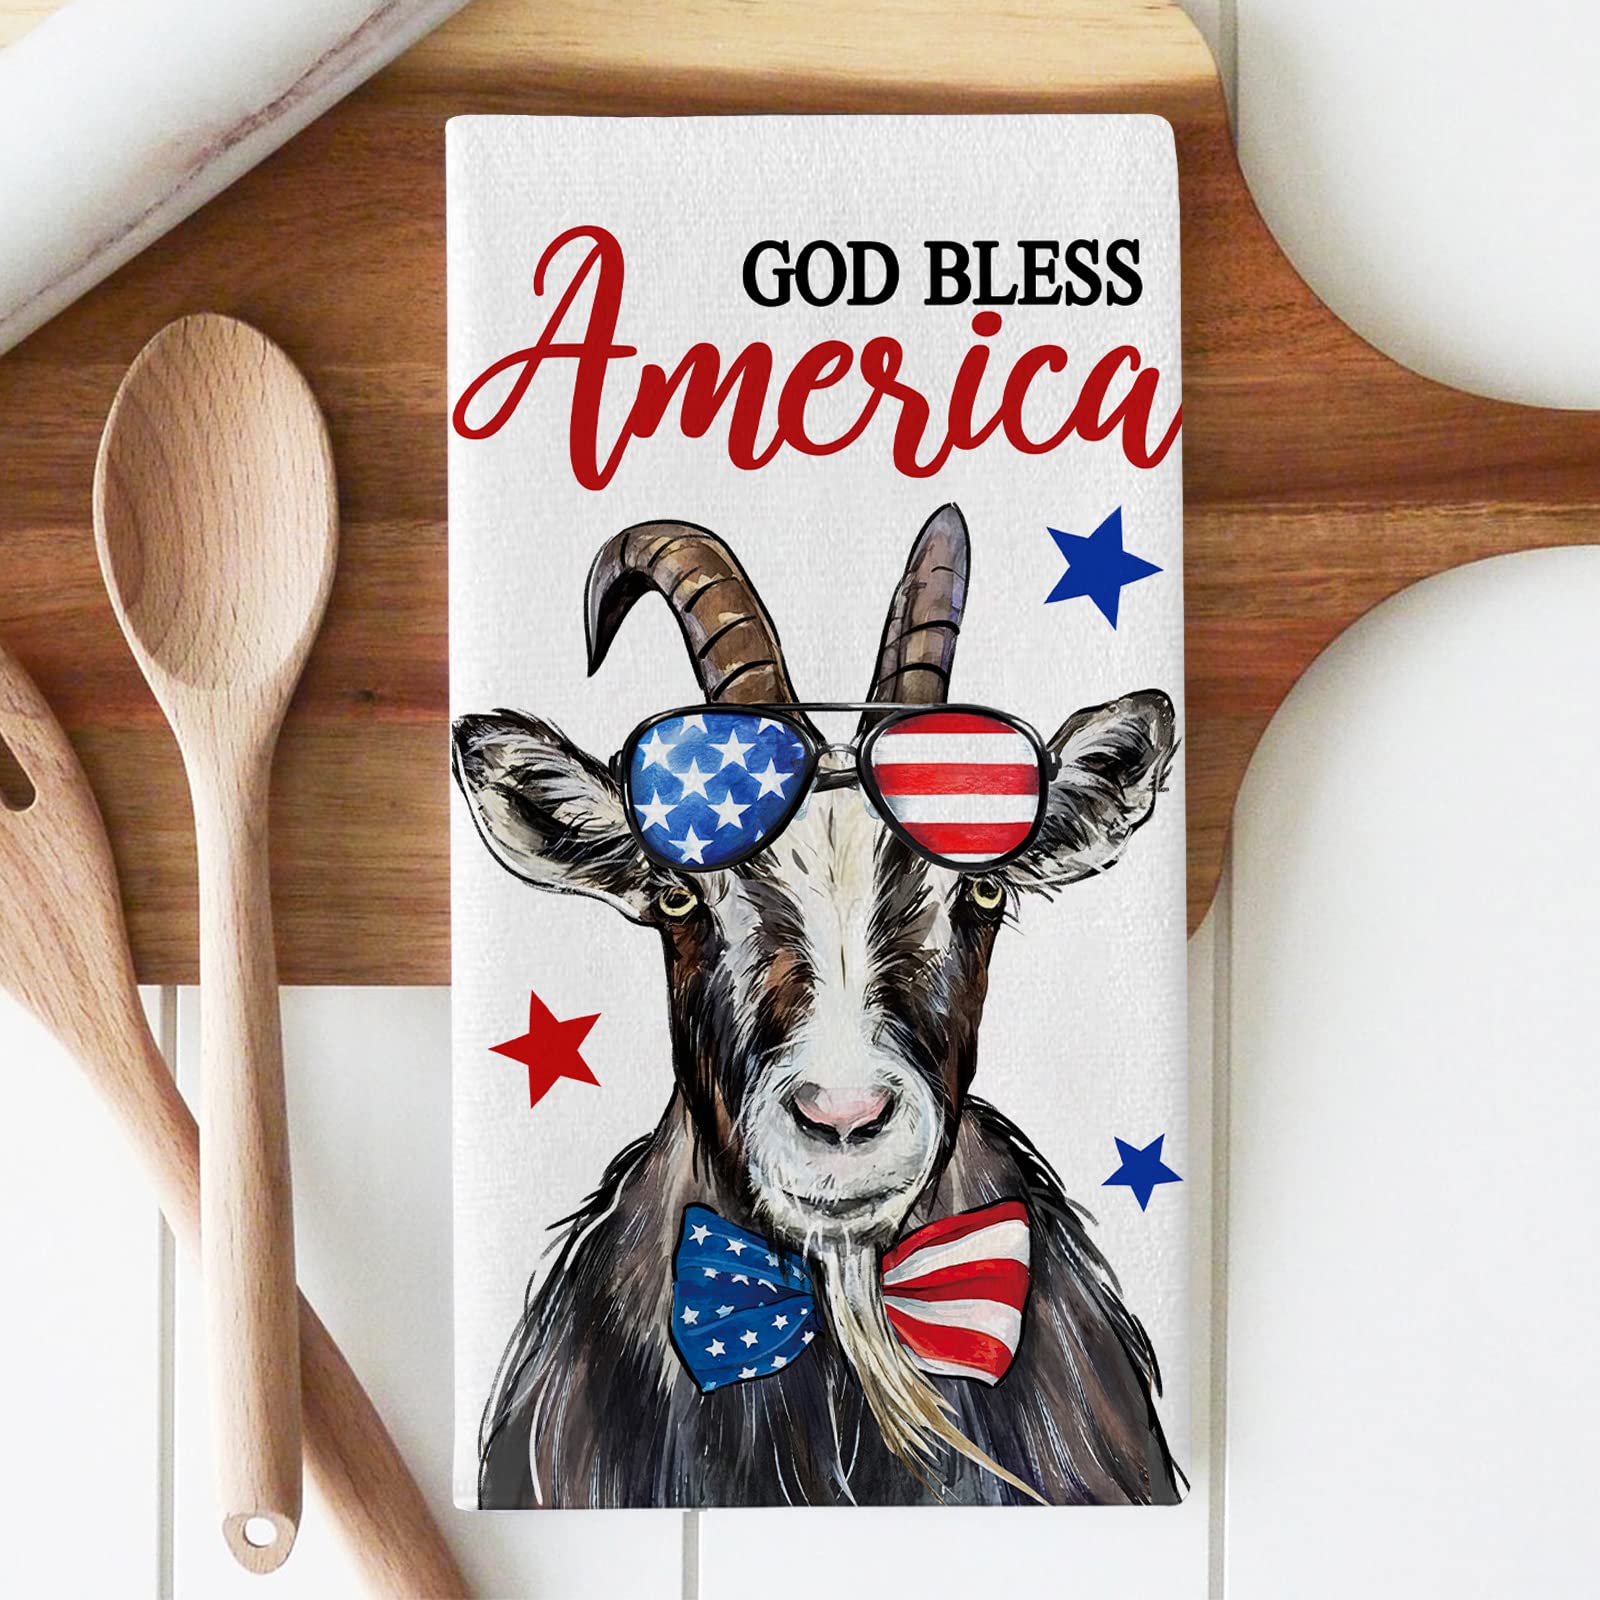 Seliem 4th of July God Bless America Patriotic Goat Kitchen Dish Towel Set of 2, Freedom Star Buffalo Plaid Check Hand Towel Drying Baking Cooking Cloth, Summer Holiday USA Kitchen Decor 18x26 Inches